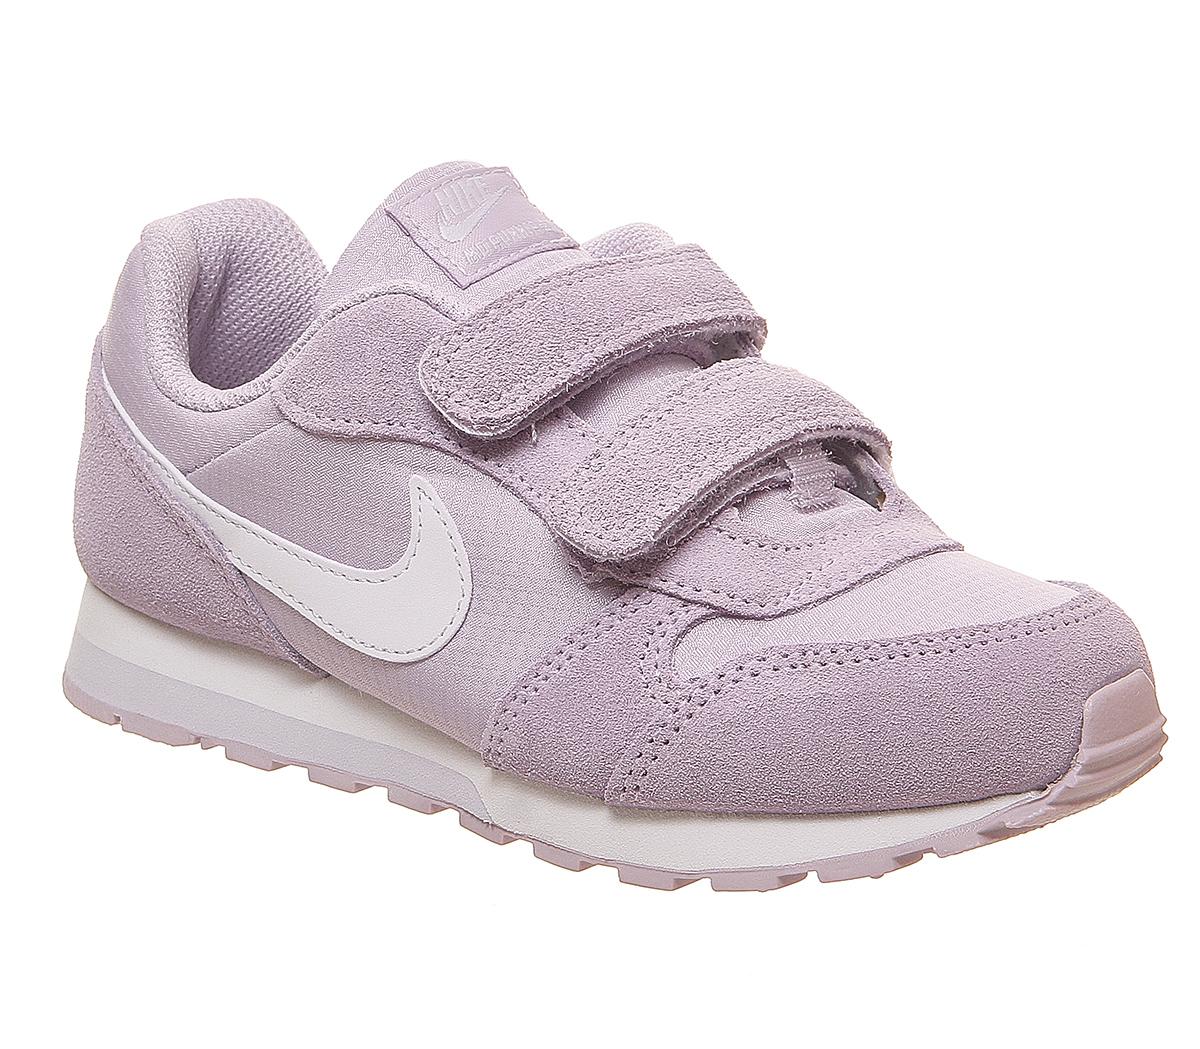 NikeMd Runner Ps TrainersIced Lilac Barely Grape